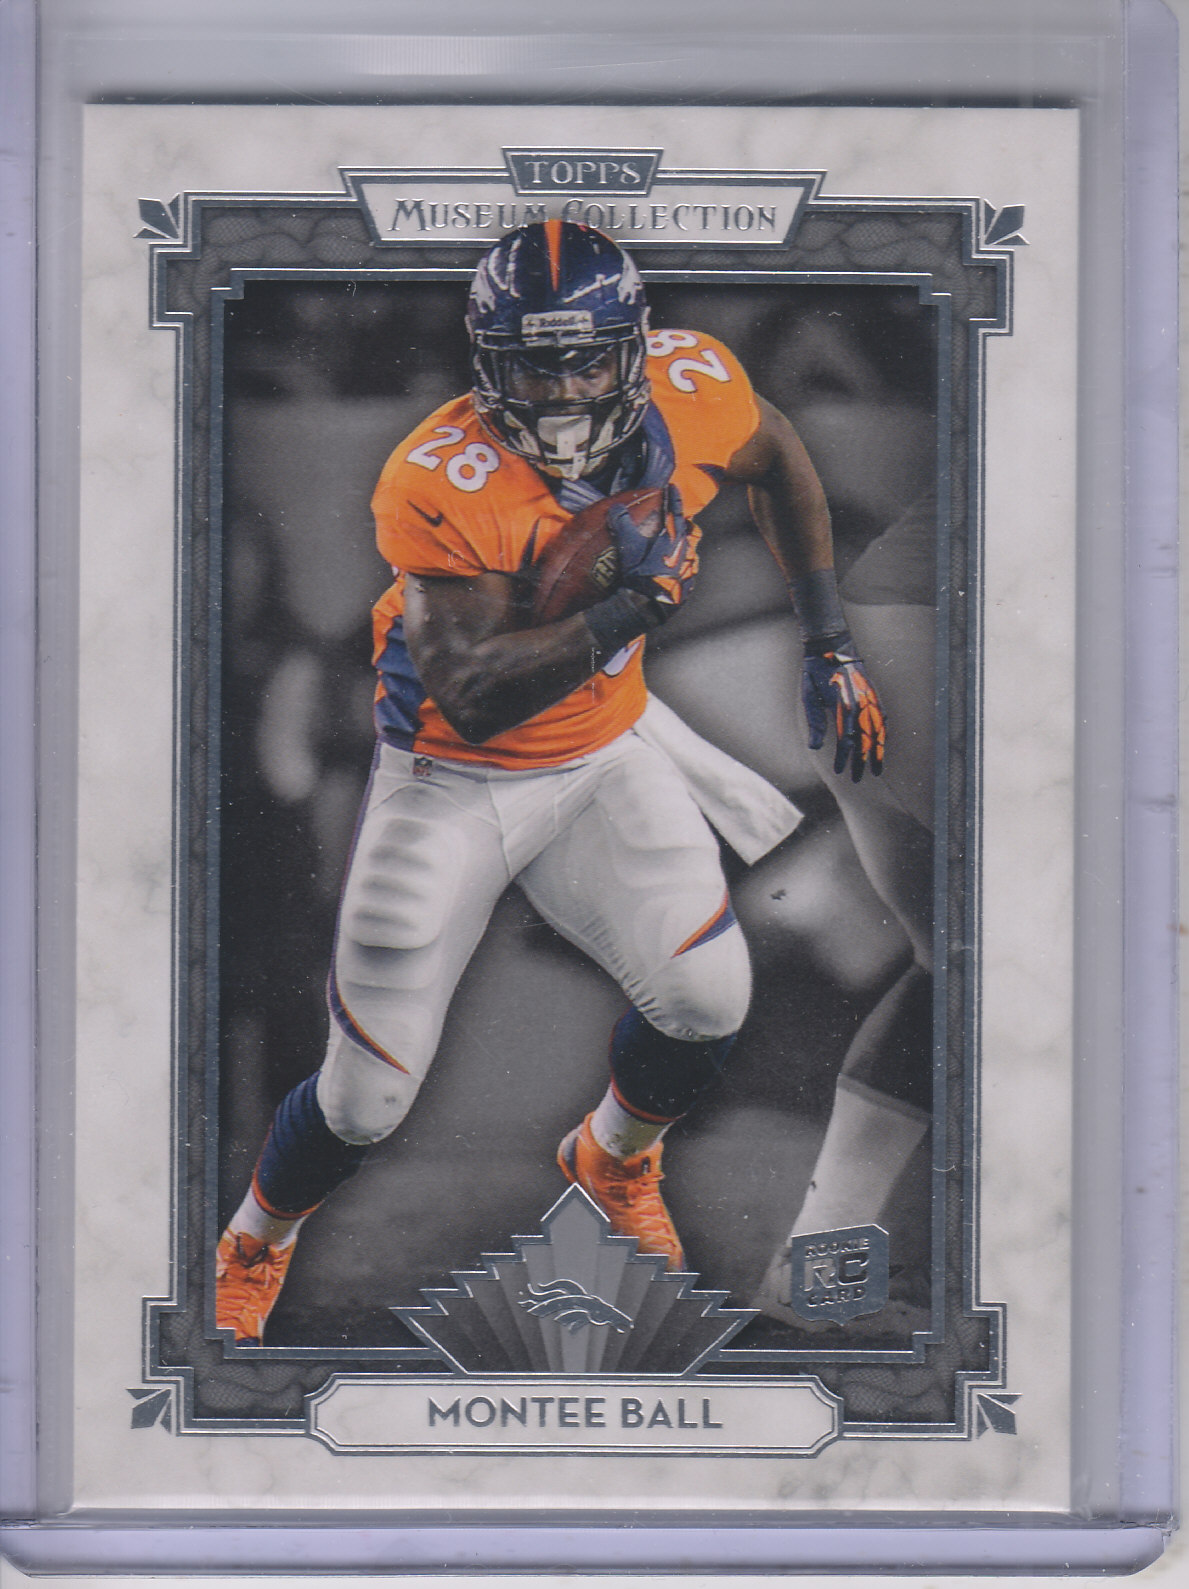 2013 Topps Museum Collection #24 Montee Ball RC